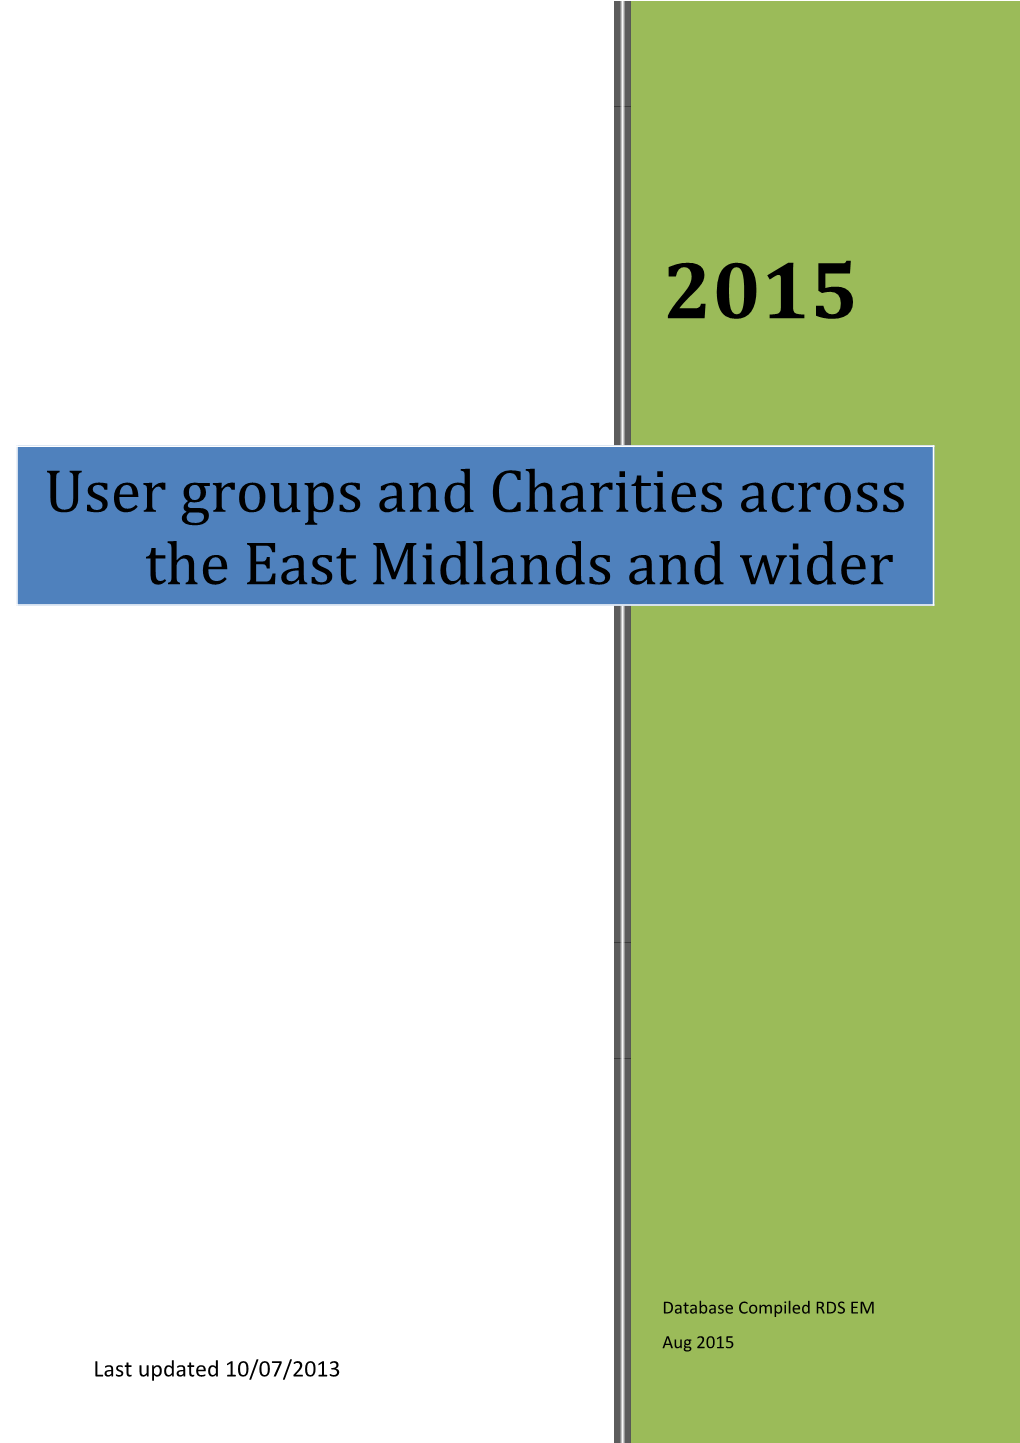 User Group and Charities Database